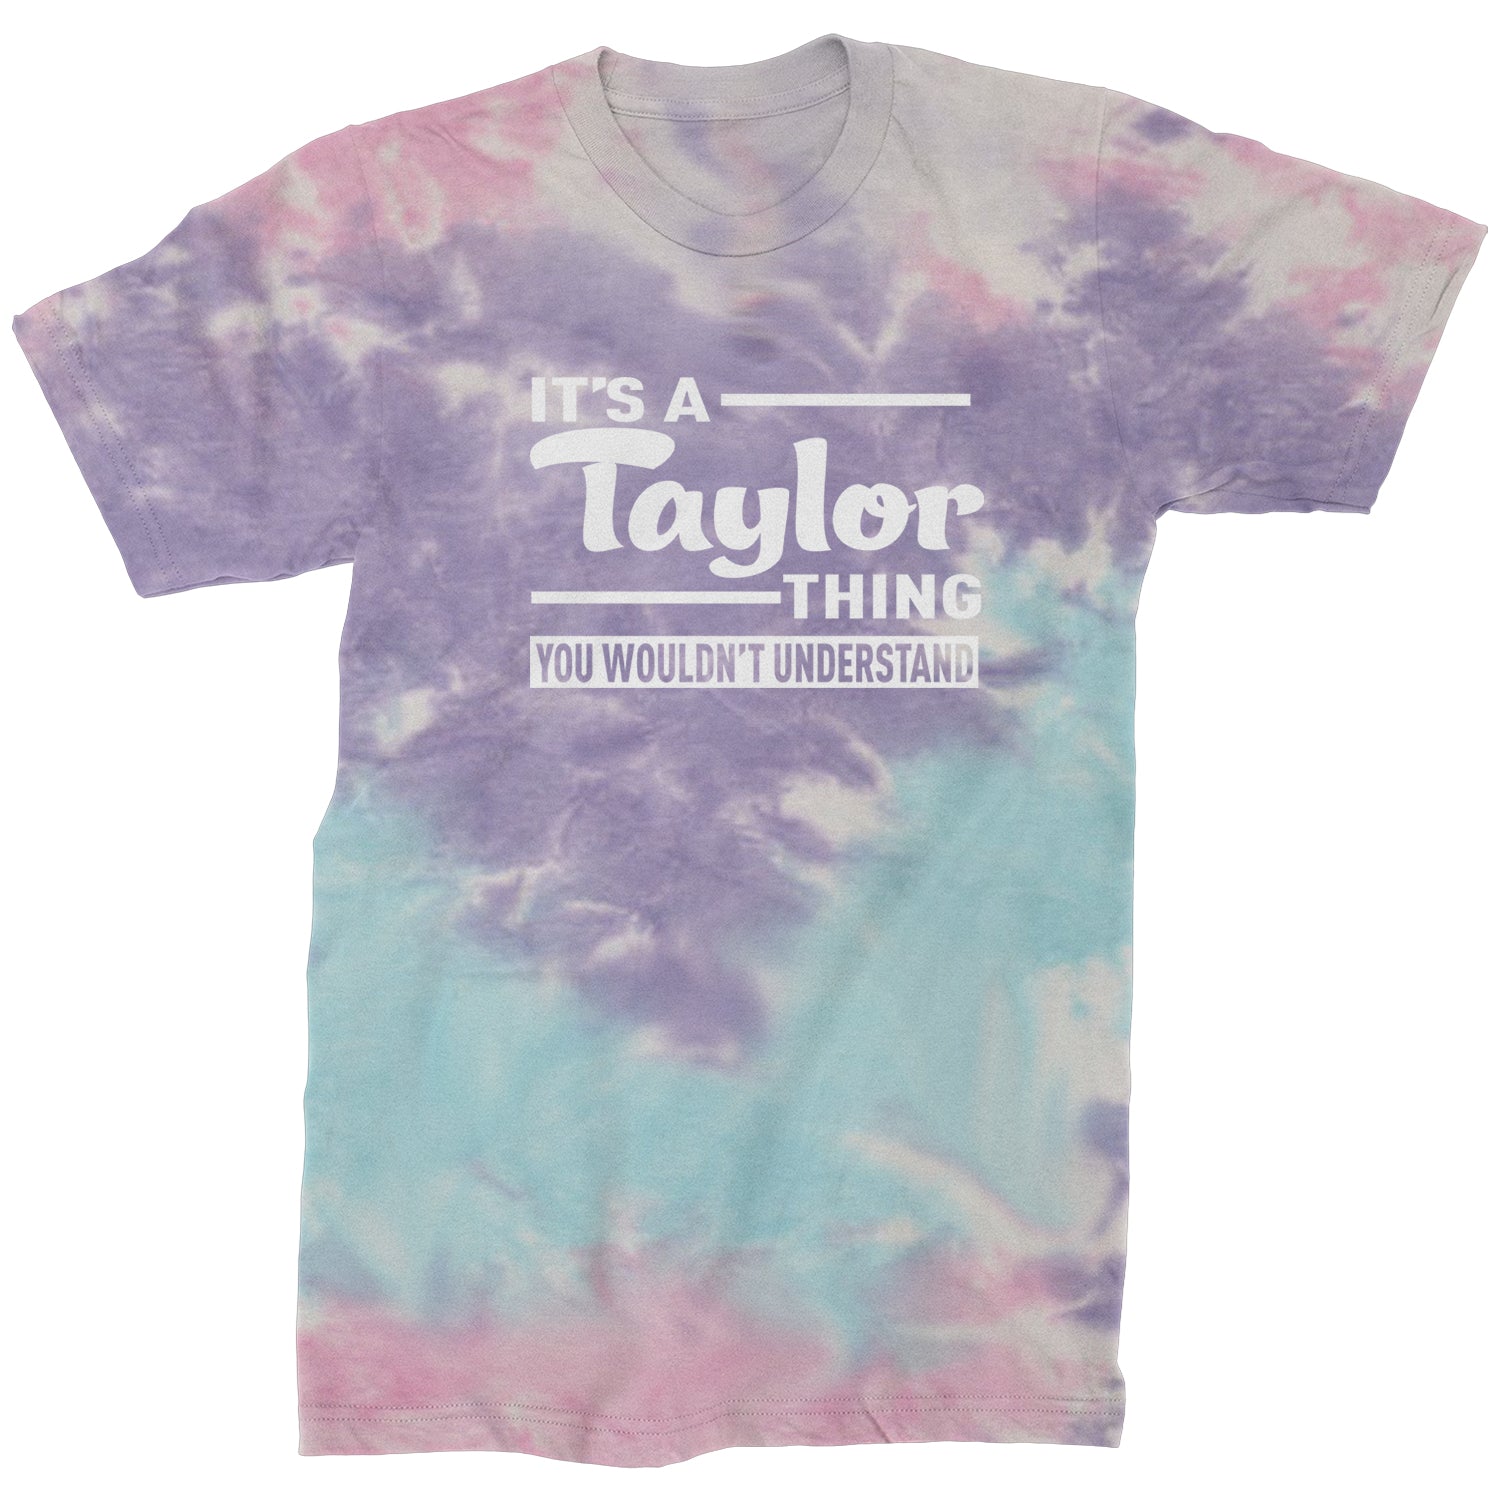 It's A Taylor Thing, You Wouldn't Understand Mens T-shirt nation, taylornation by Expression Tees